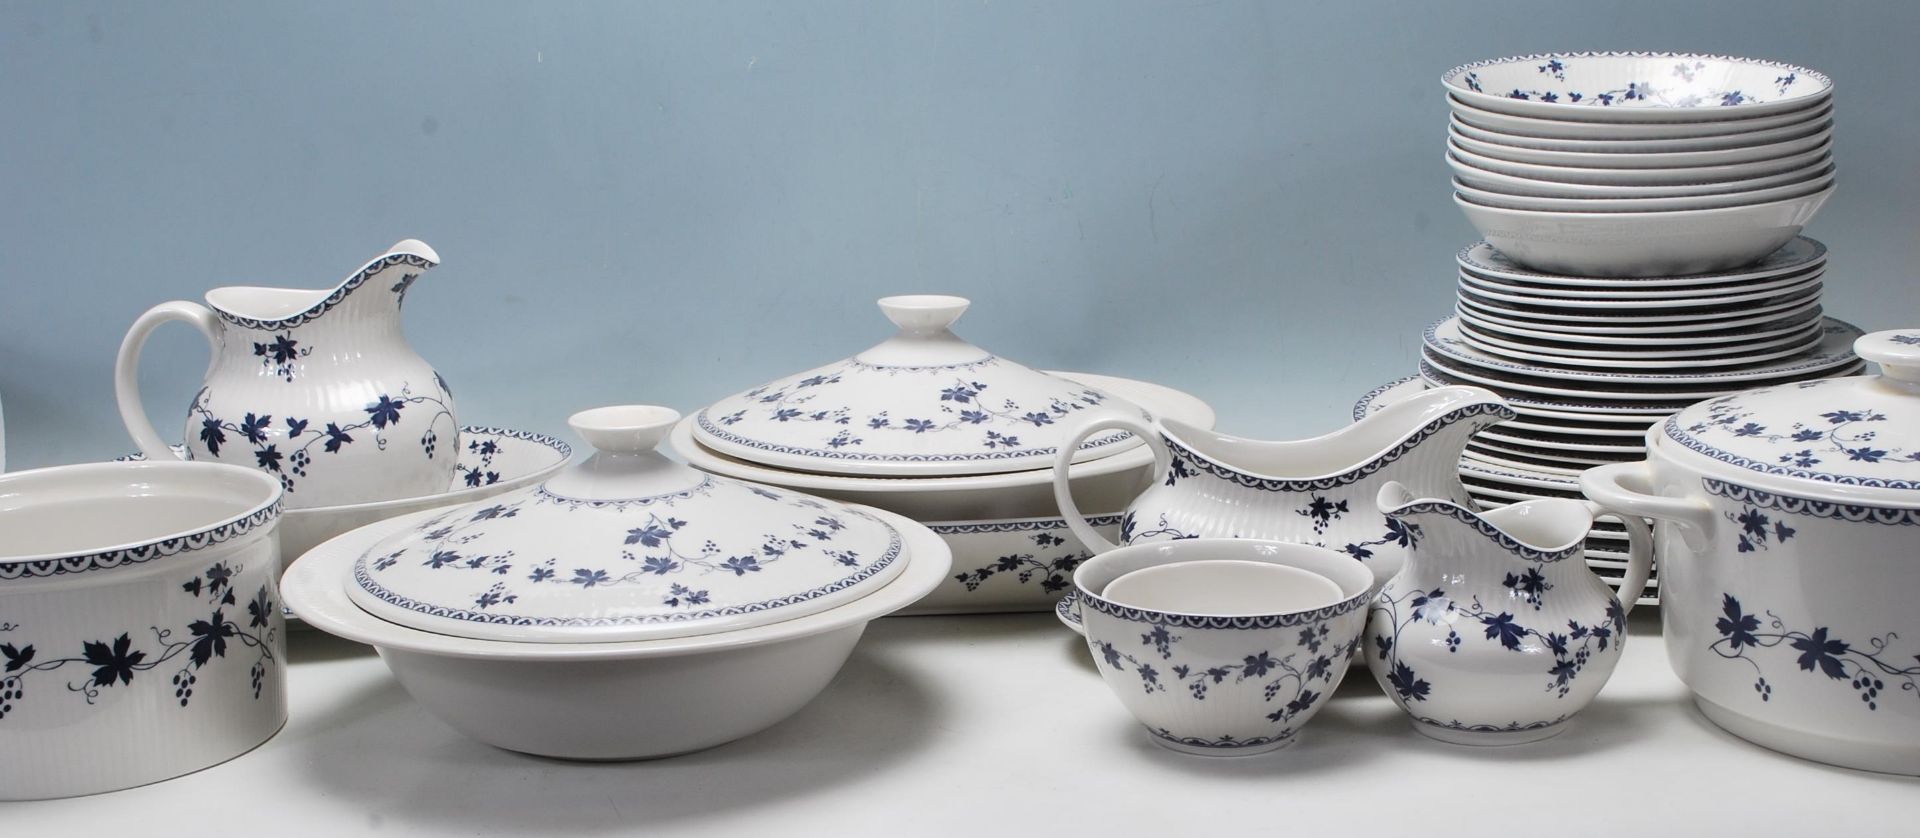 Royal Doulton - Yorktown - A large fine bone china dinner service decorated with blue floral